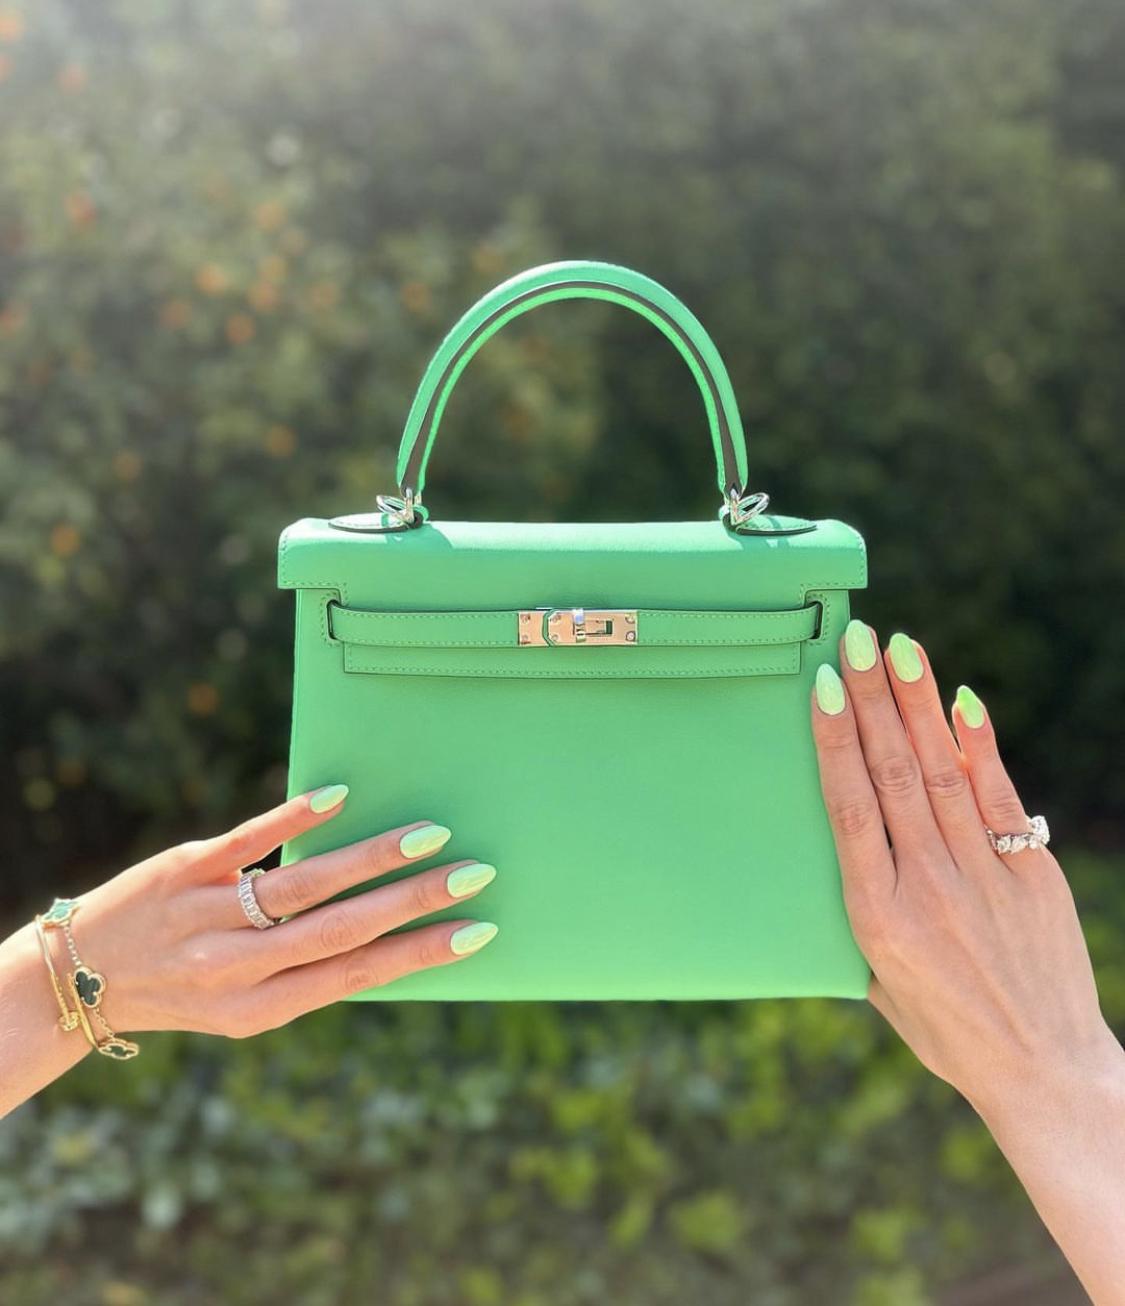 Hermès launches two potentially iconic bags this season - PurseBop